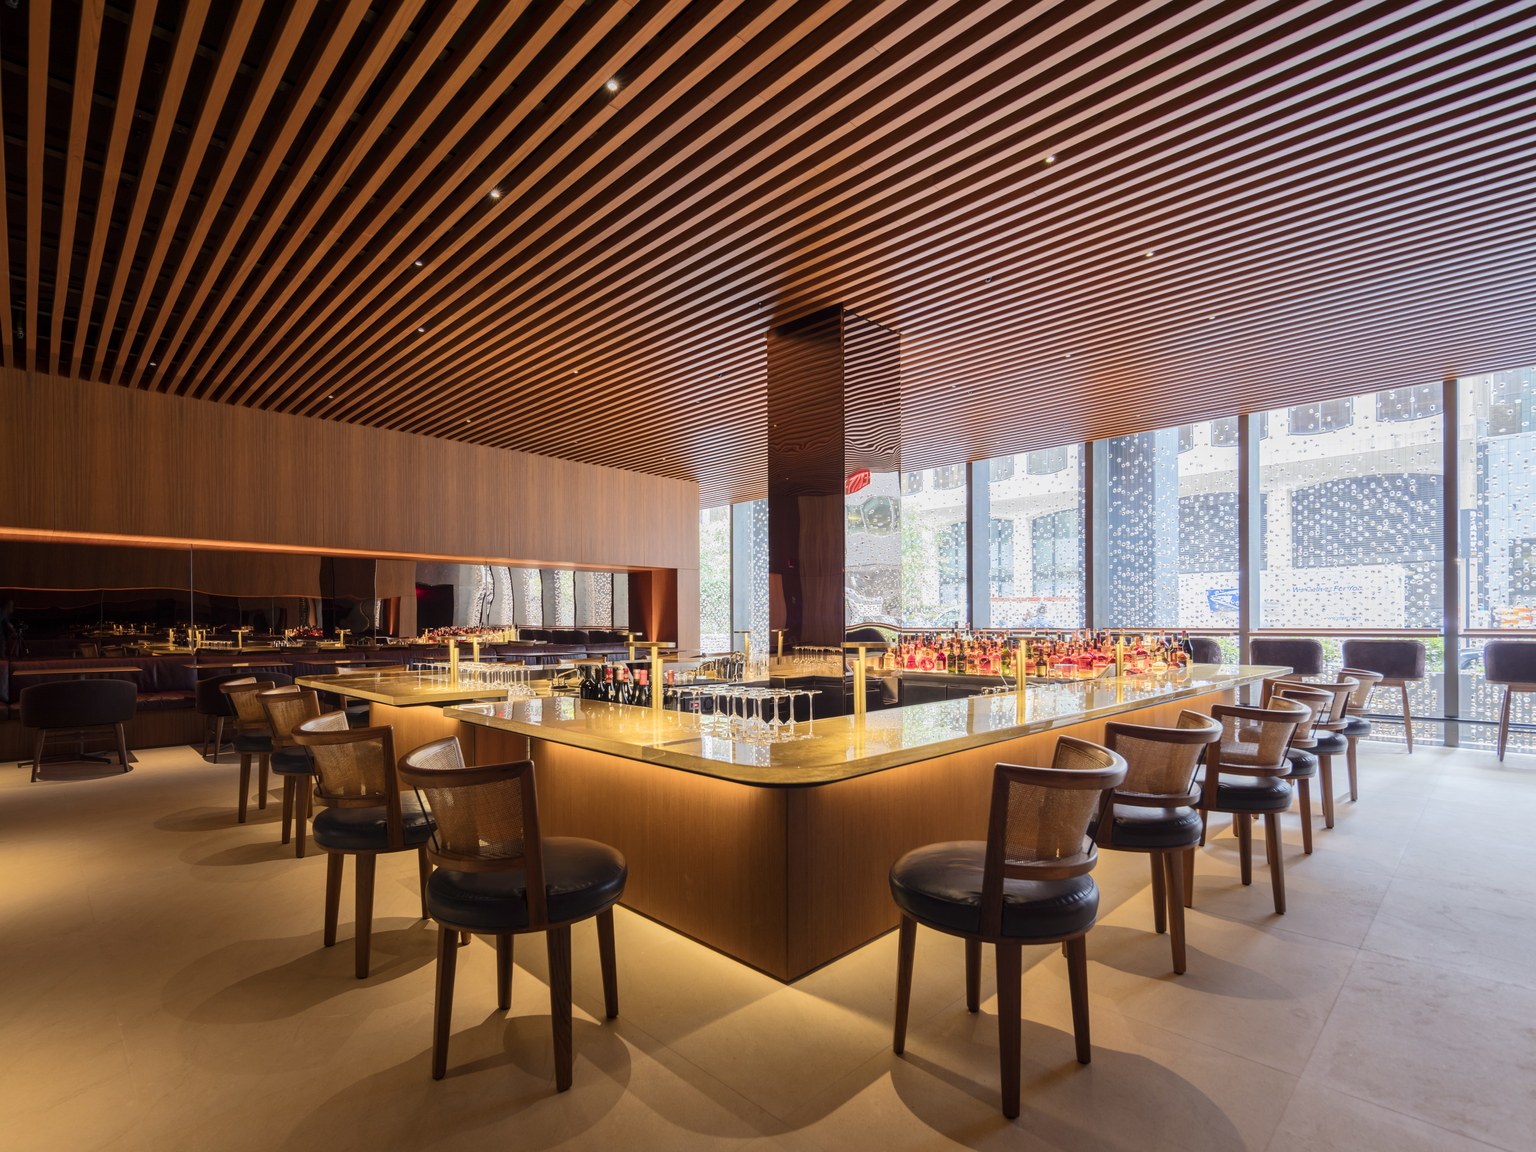 Interior of a warmly textured bar room with a wood ceiling, at the new Four Seasons